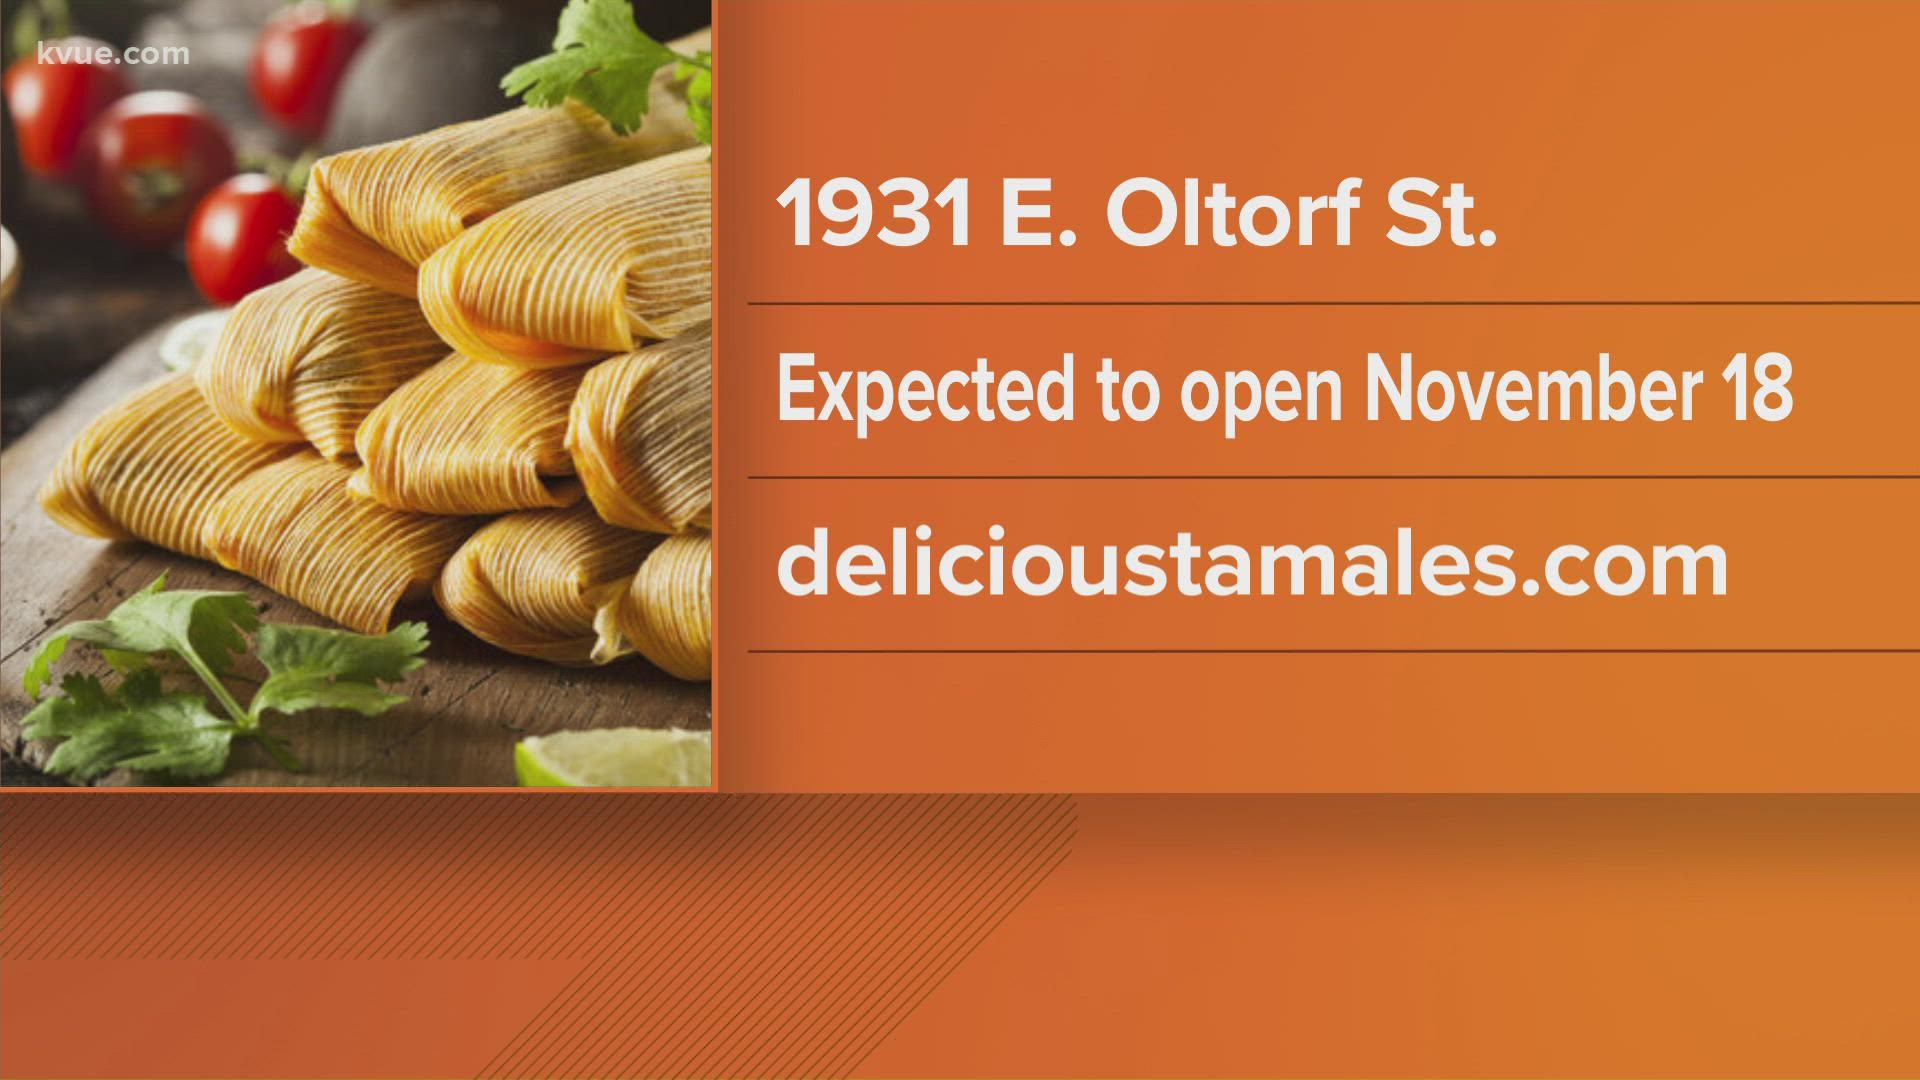 Delicious Tamales is the leading manufacturer of tamales in San Antonio, selling more than 2.1 million each year, according to its website.